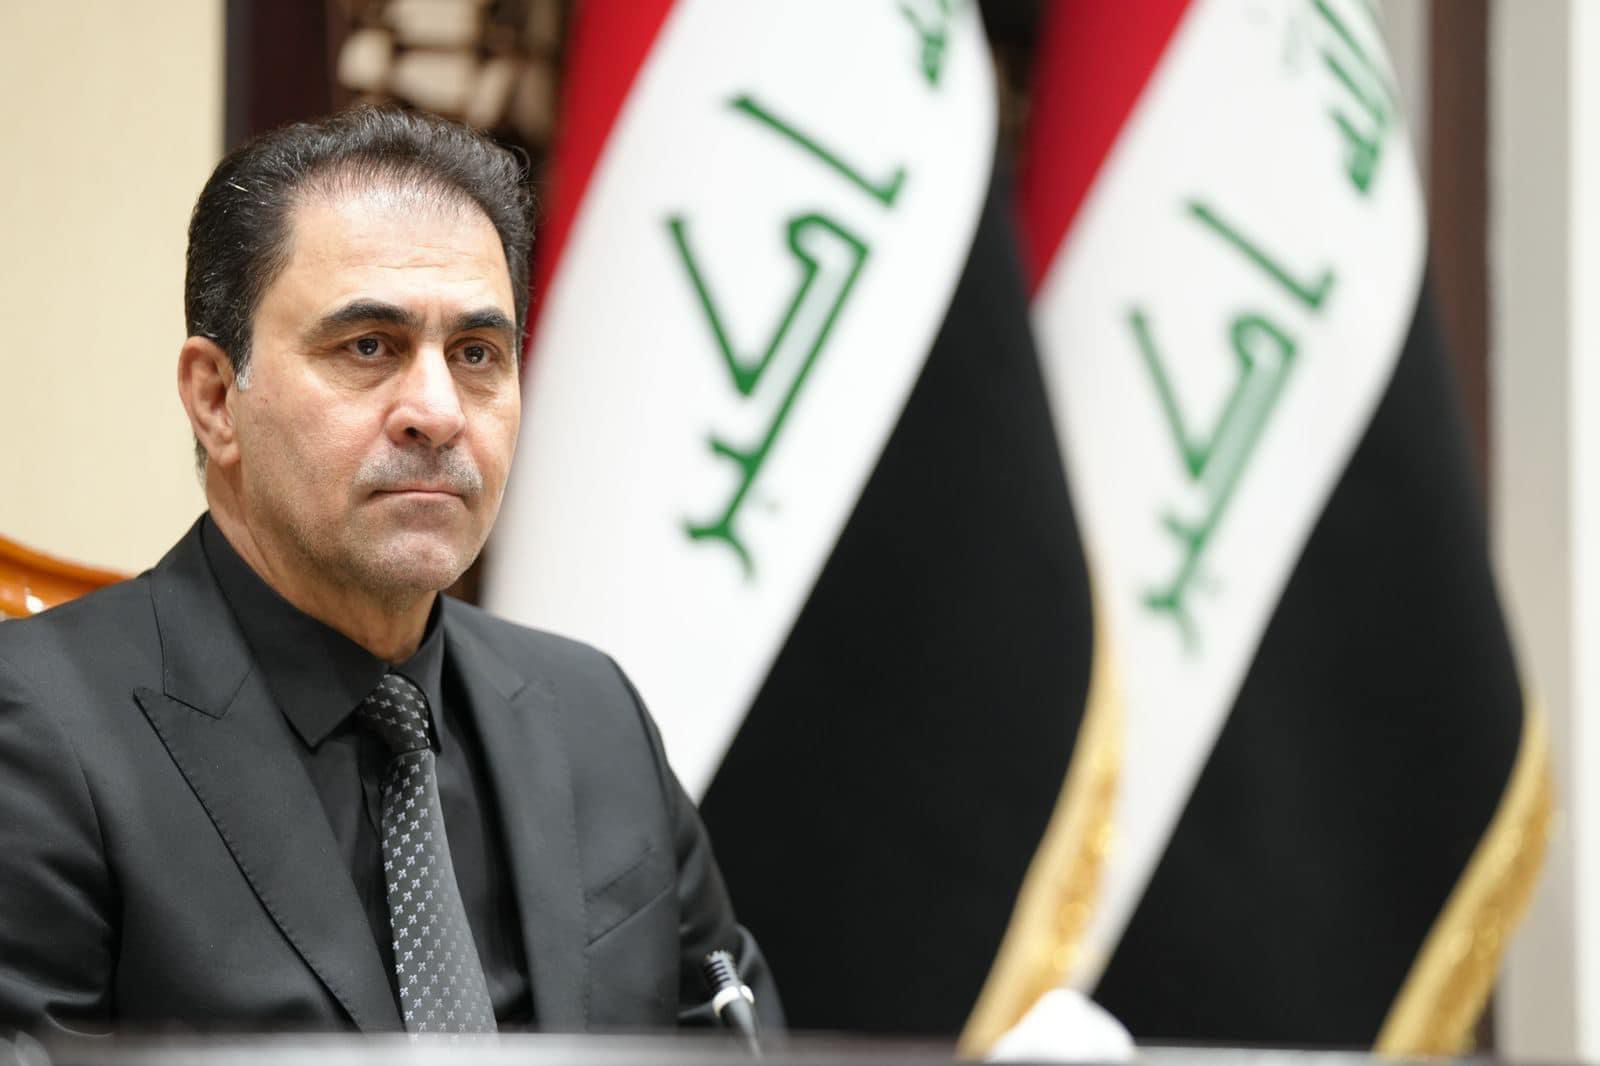 Iraqi Parliament mourns tragic helicopter crash that killed Iranian President and top officials